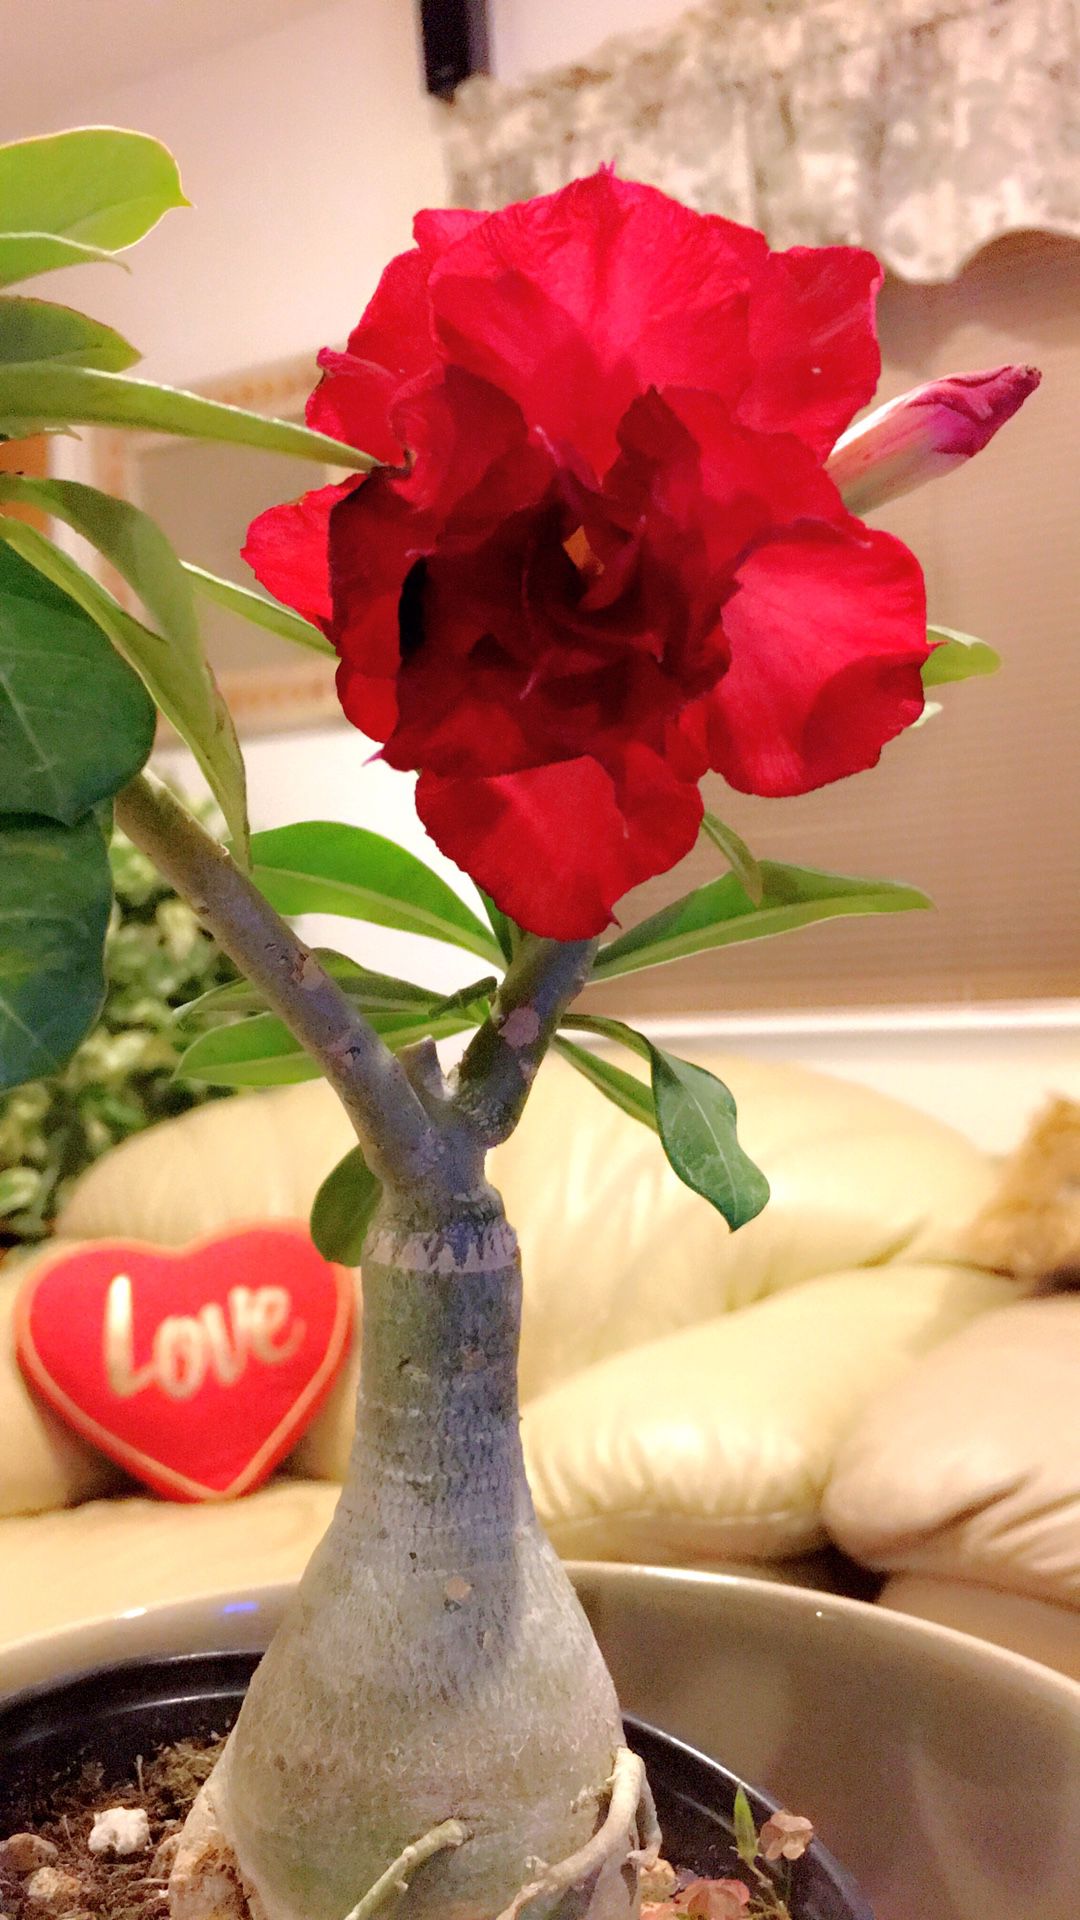 PLANTER IS NOT INCLUDED - Full Red Triple Flower Desert Rose - Just the plant only - Outdoor Plant